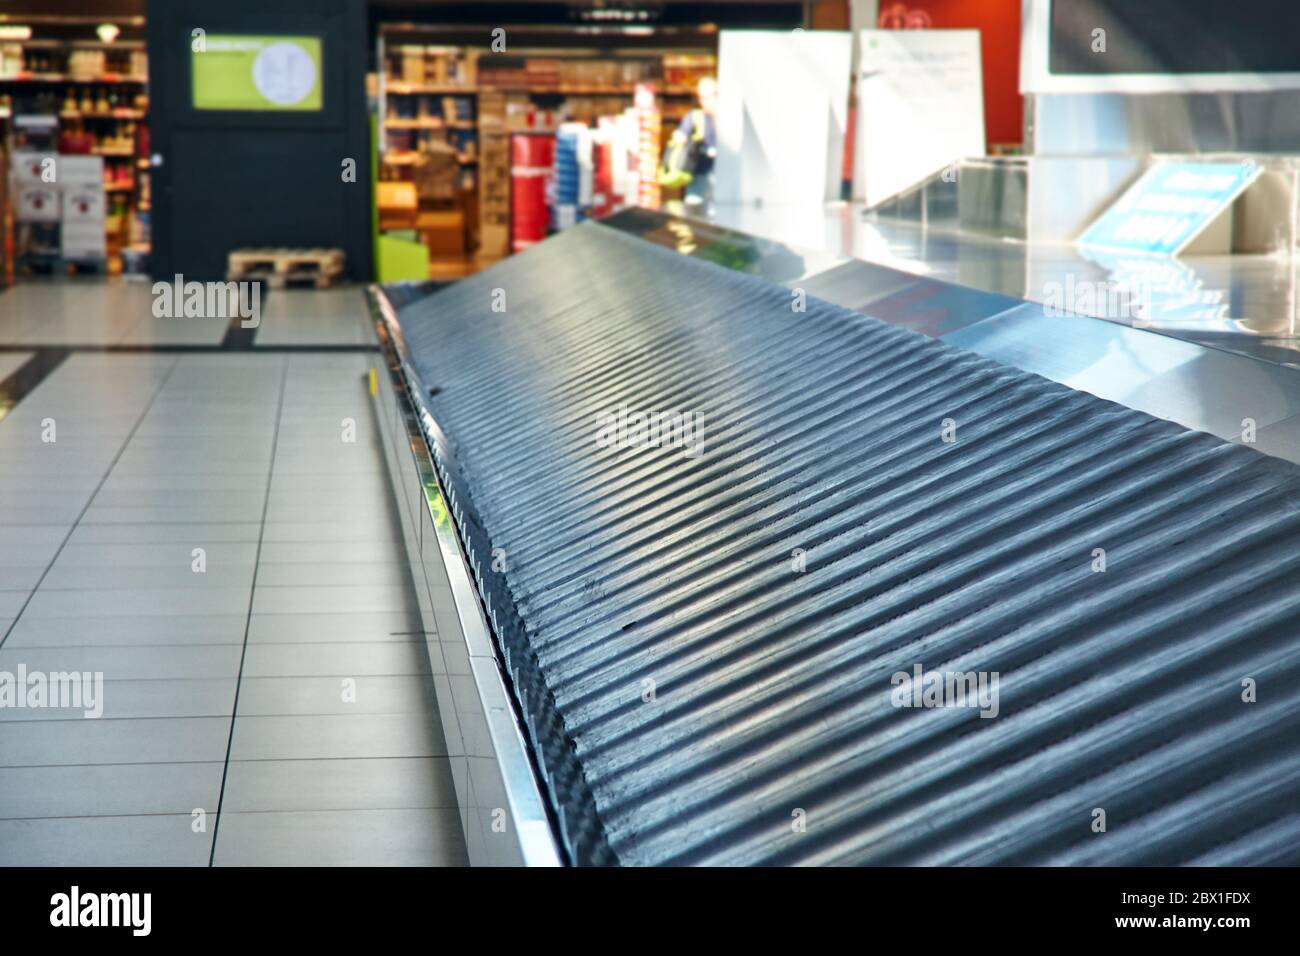 Empty conveyor belt at baggage claim at airport. Stock Photo